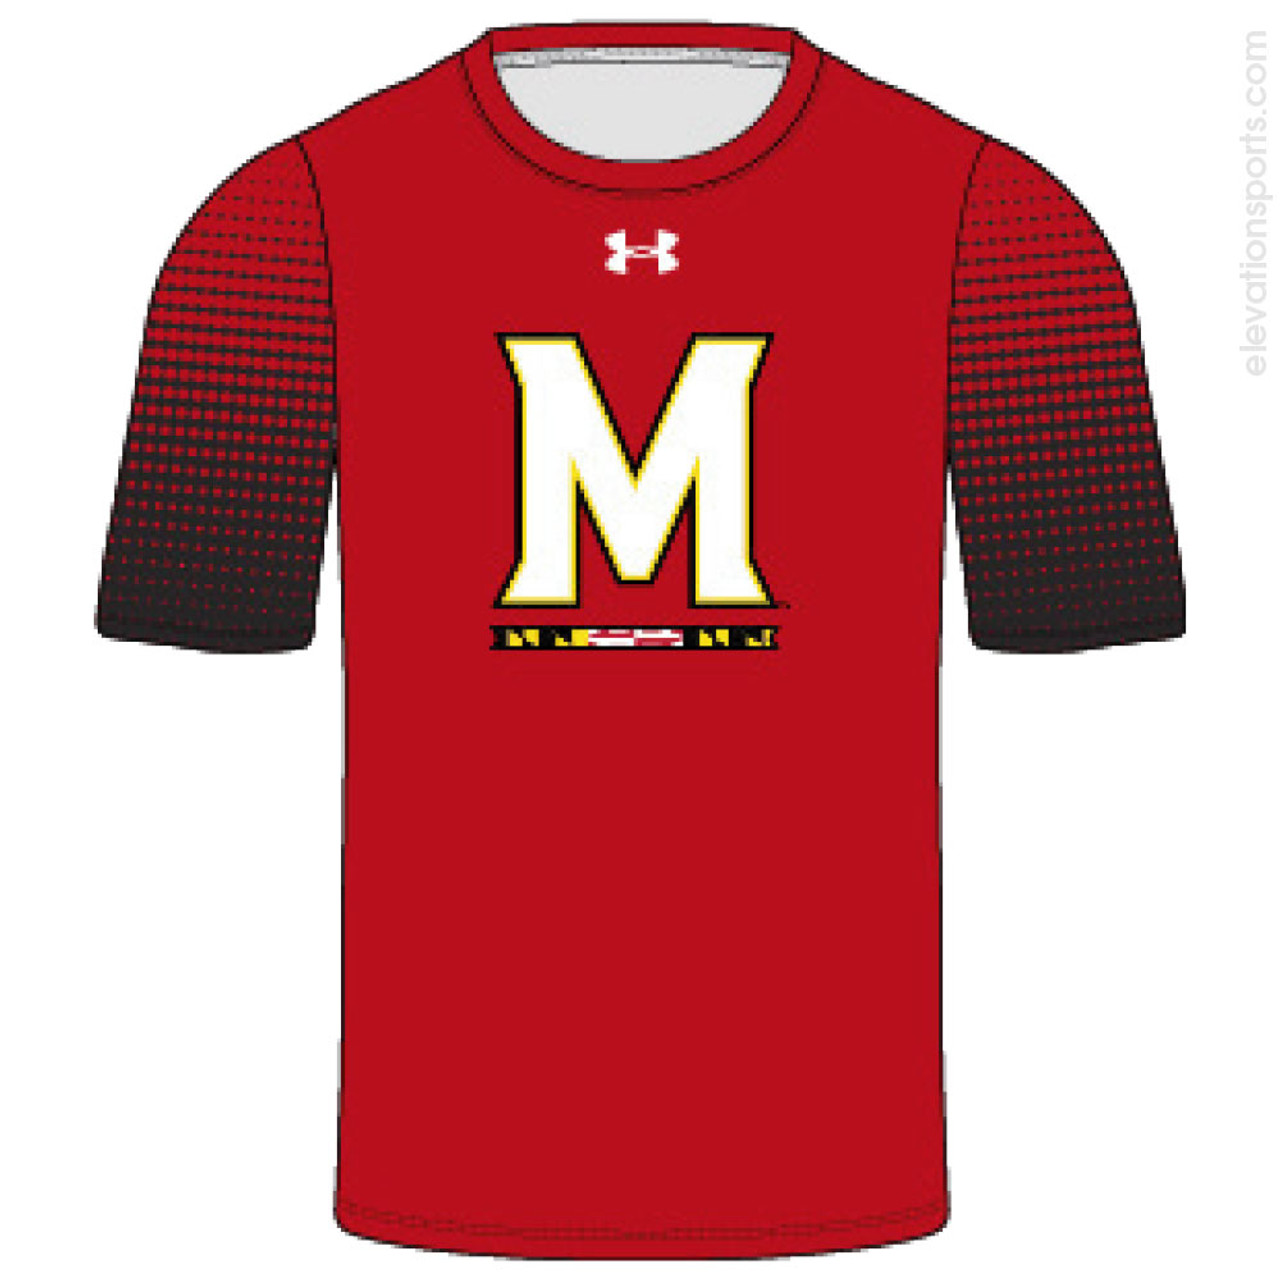 Under Armour Custom Sublimated Shirts - Eclipse